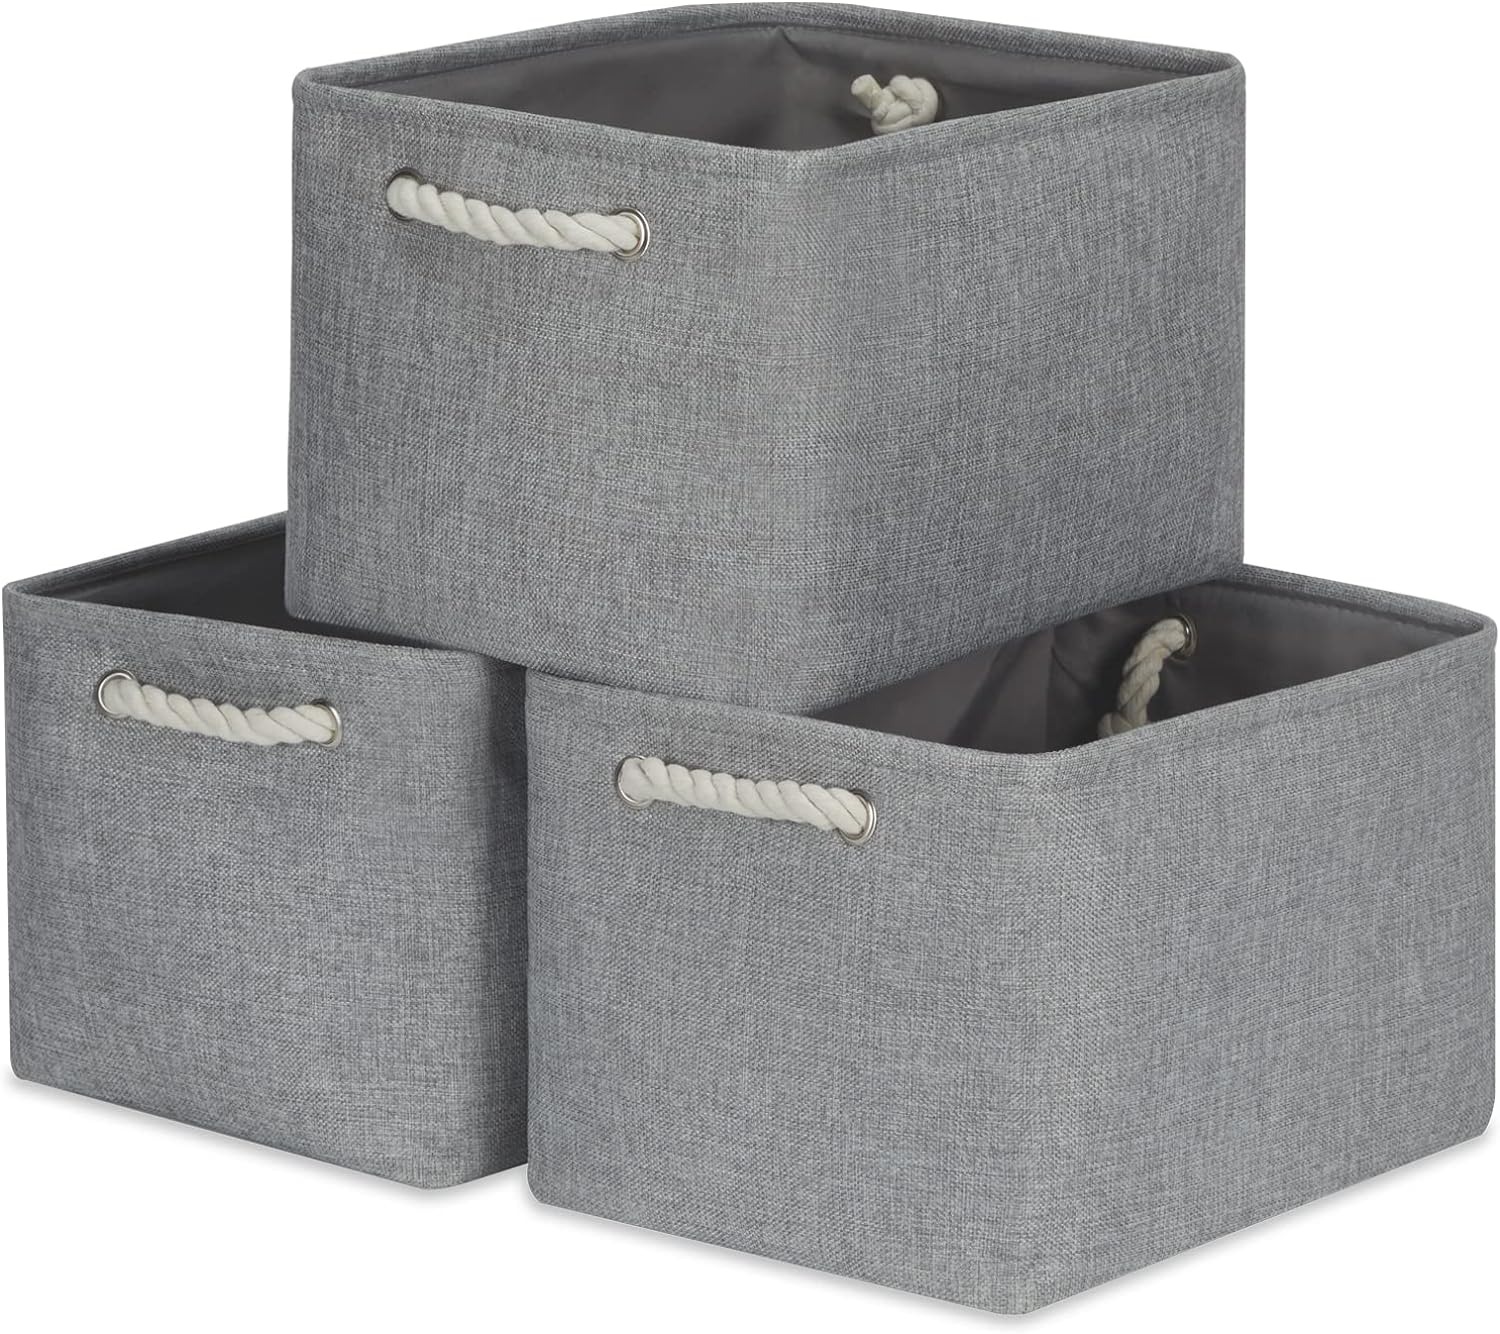 Temary Fabric Storage Baskets 3 Pcs Decorative Baskets Bins for Gifts Empty, Foldable Storage Baskets with Handles for Organizing Shelf, Home Closet (Grey,15Lx11Wx9.5H Inches)